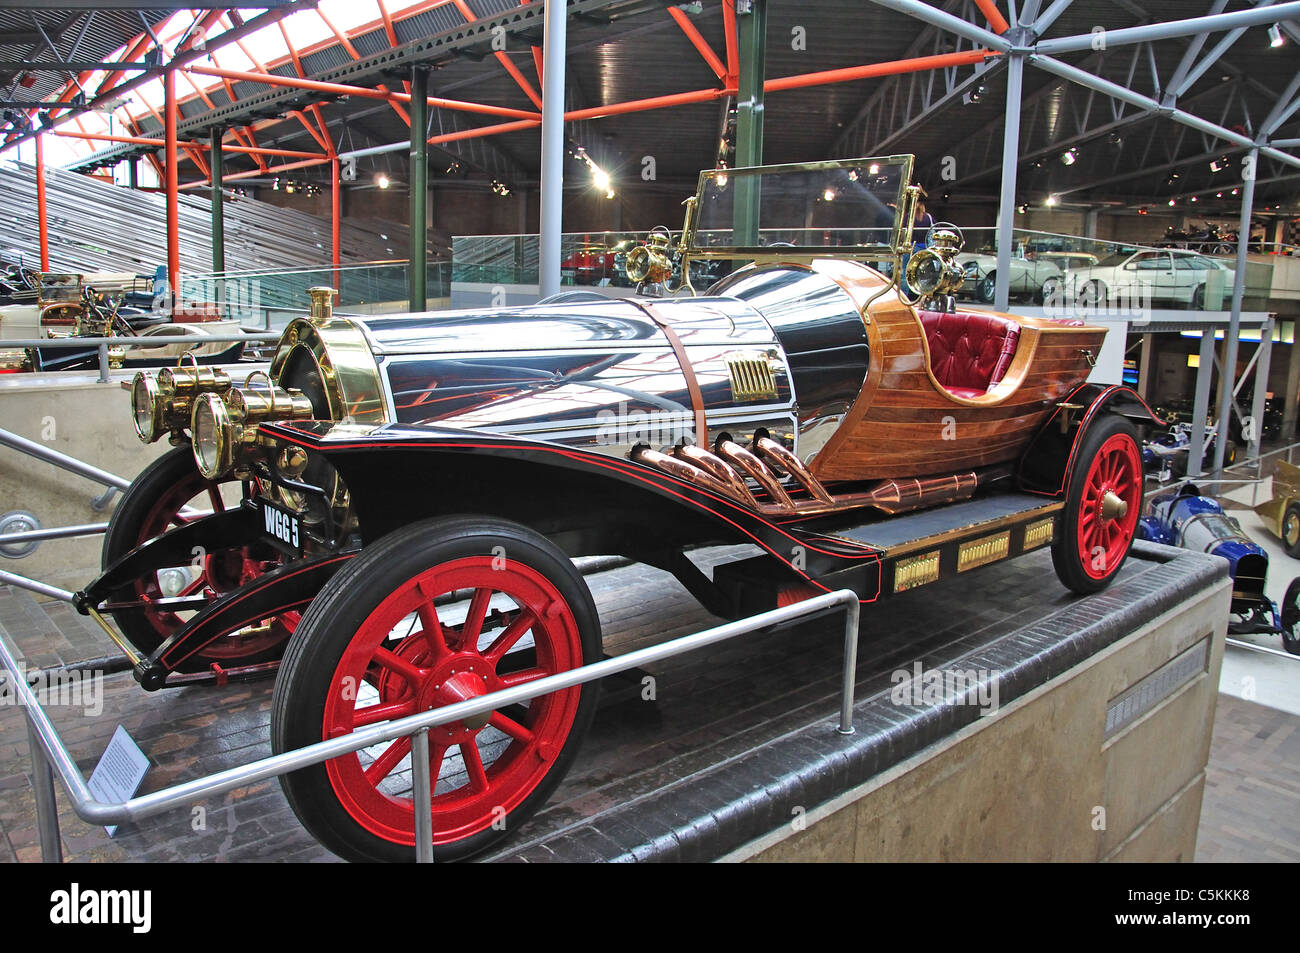 "Chitty Chitty Bang Bang" réplique voiture, le National Motor Museum, Beaulieu, New Forest, Hampshire, Angleterre, Royaume-Uni Banque D'Images